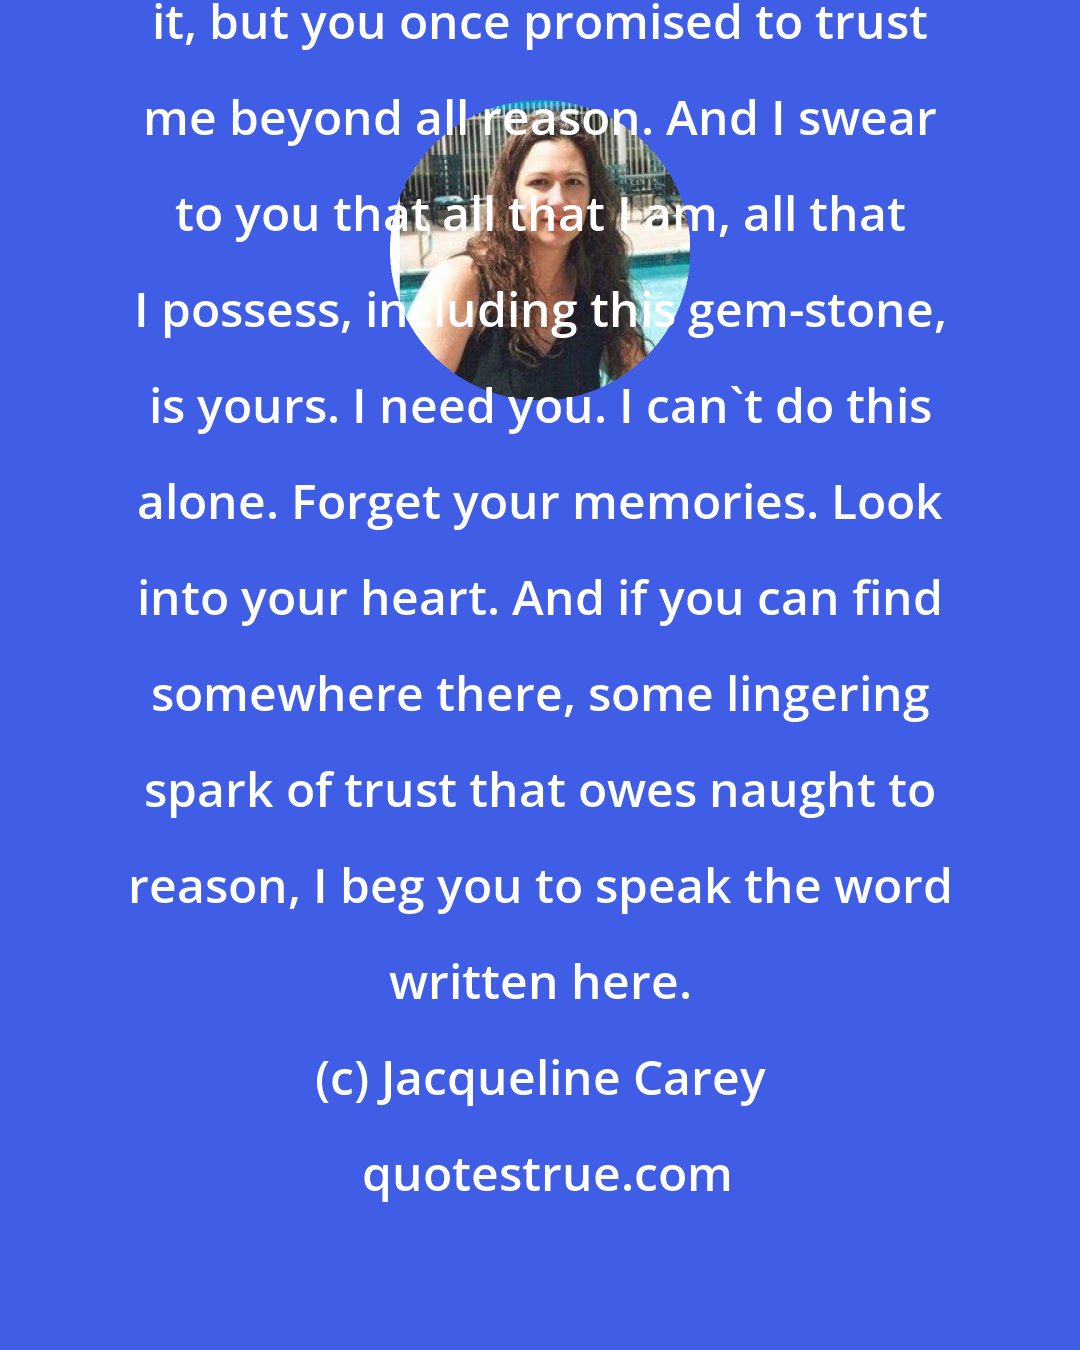 Jacqueline Carey: Sidonie, I know you don't remember it, but you once promised to trust me beyond all reason. And I swear to you that all that I am, all that I possess, including this gem-stone, is yours. I need you. I can't do this alone. Forget your memories. Look into your heart. And if you can find somewhere there, some lingering spark of trust that owes naught to reason, I beg you to speak the word written here.